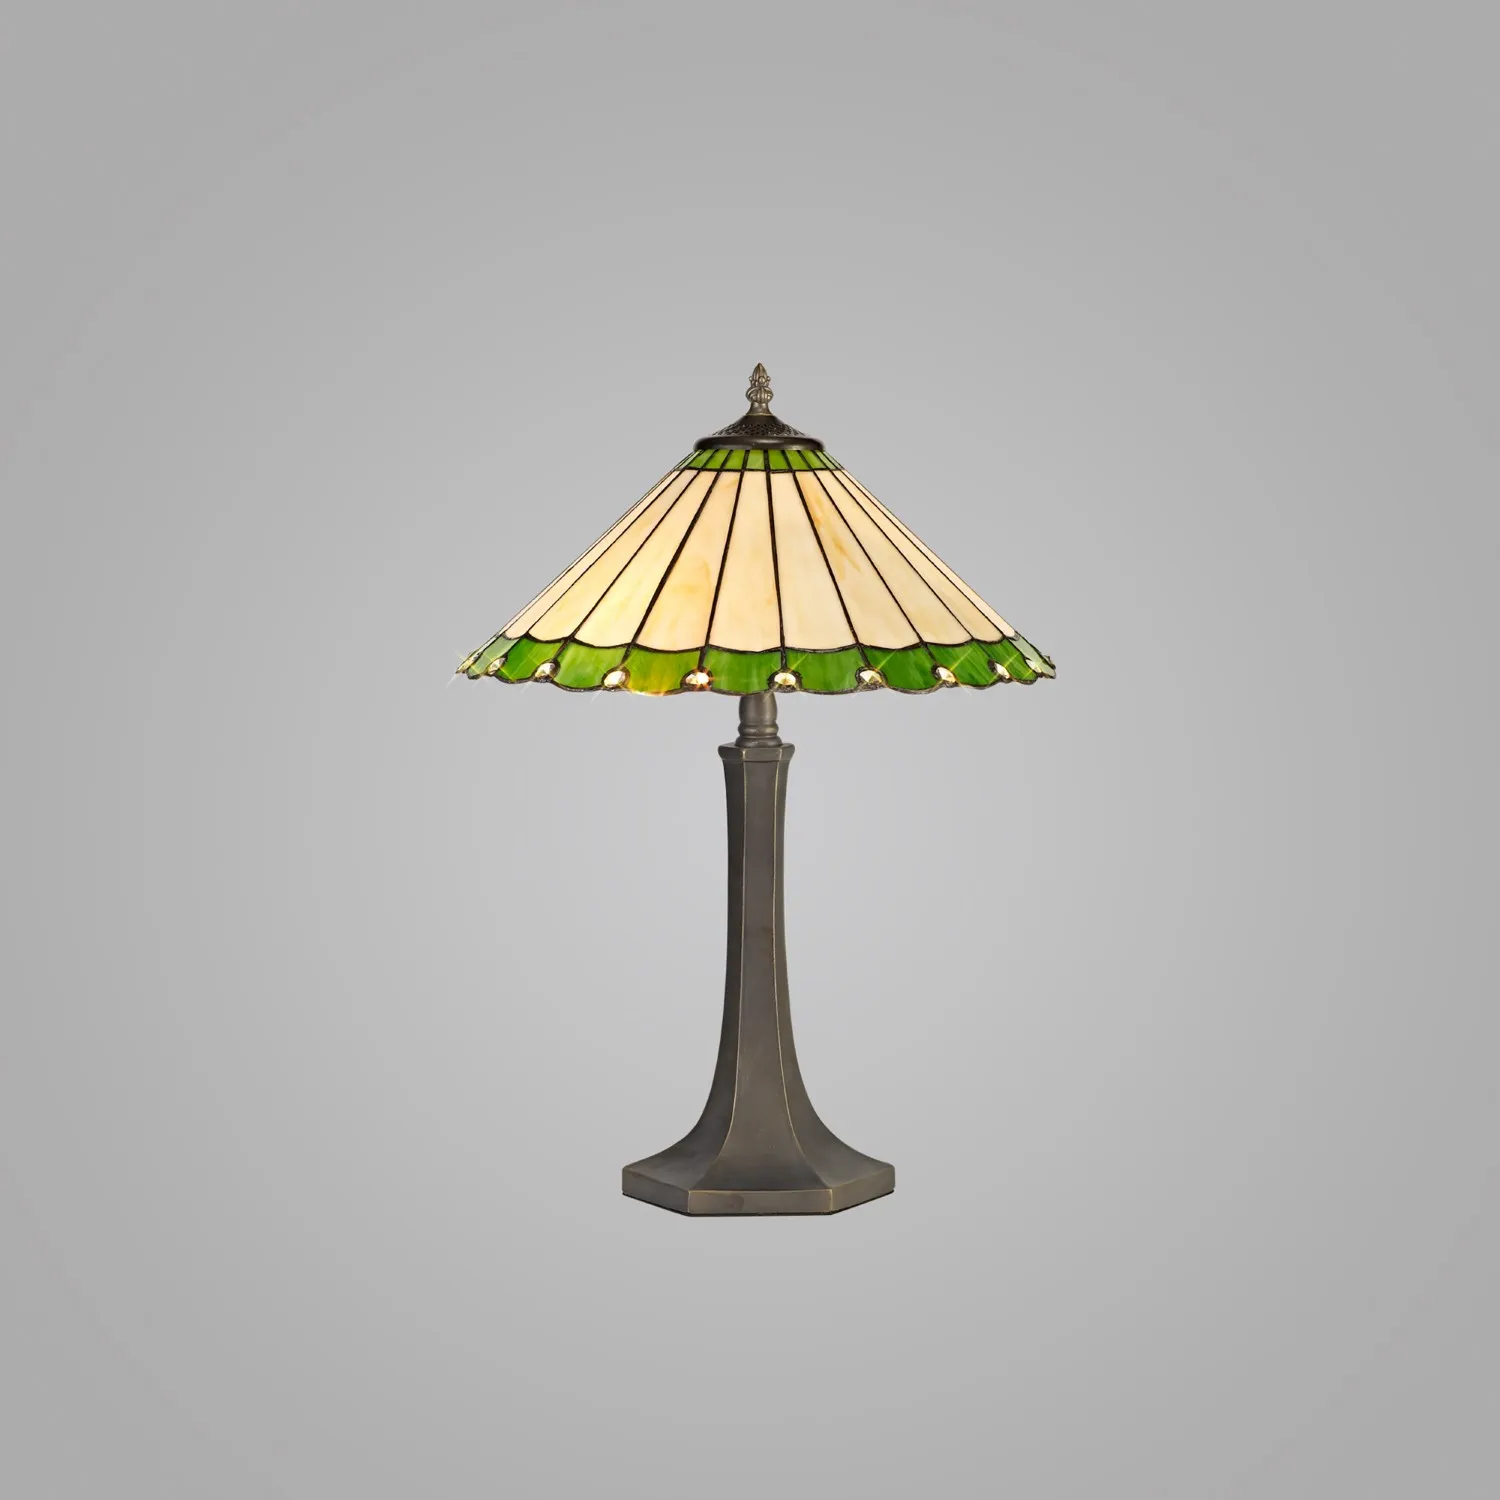 Ware 2 Light Octagonal Table Lamp E27 With 40cm Tiffany Shade, Green Cream Crystal Aged Antique Brass